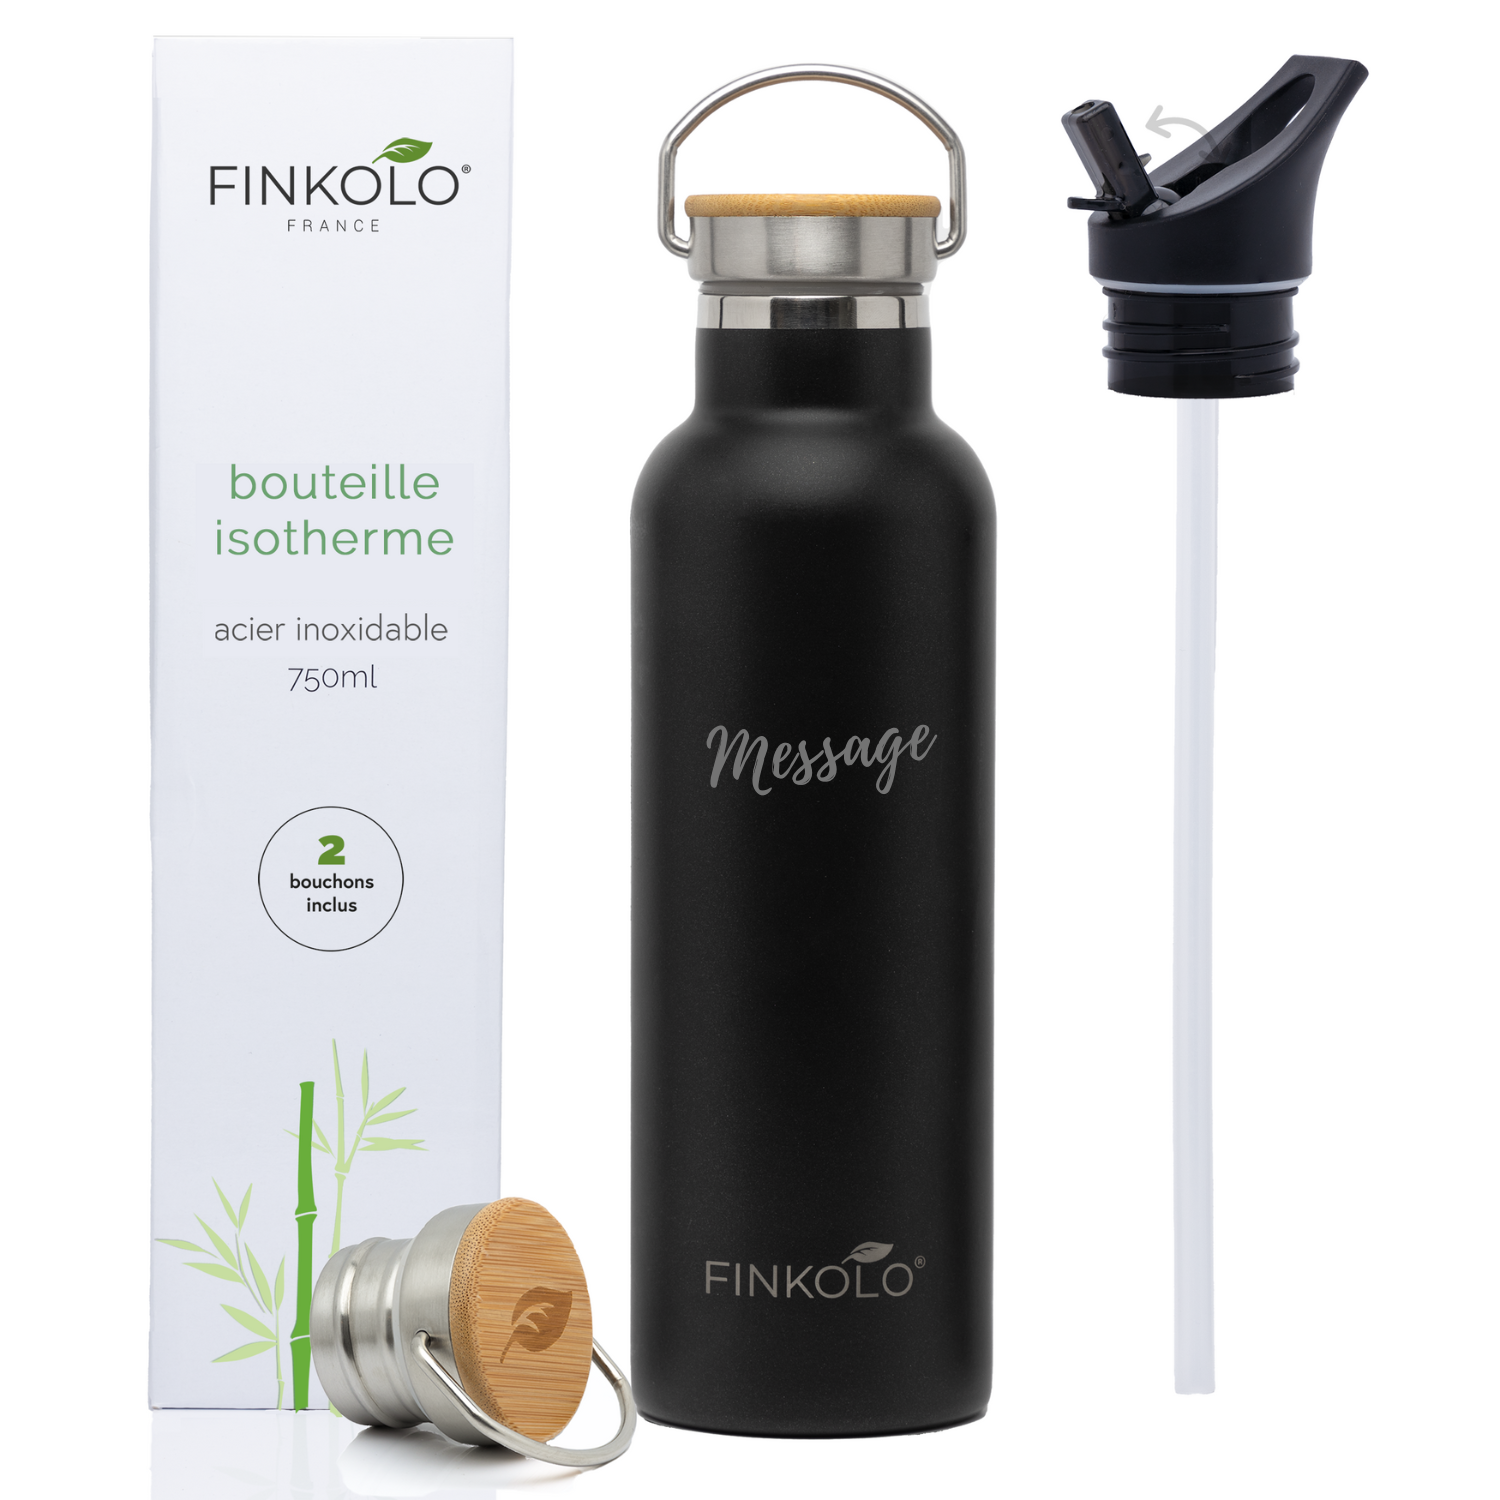 Finkolo Gourde Isotherme Inox 750ml - Bouteille Isotherme Inox - 2